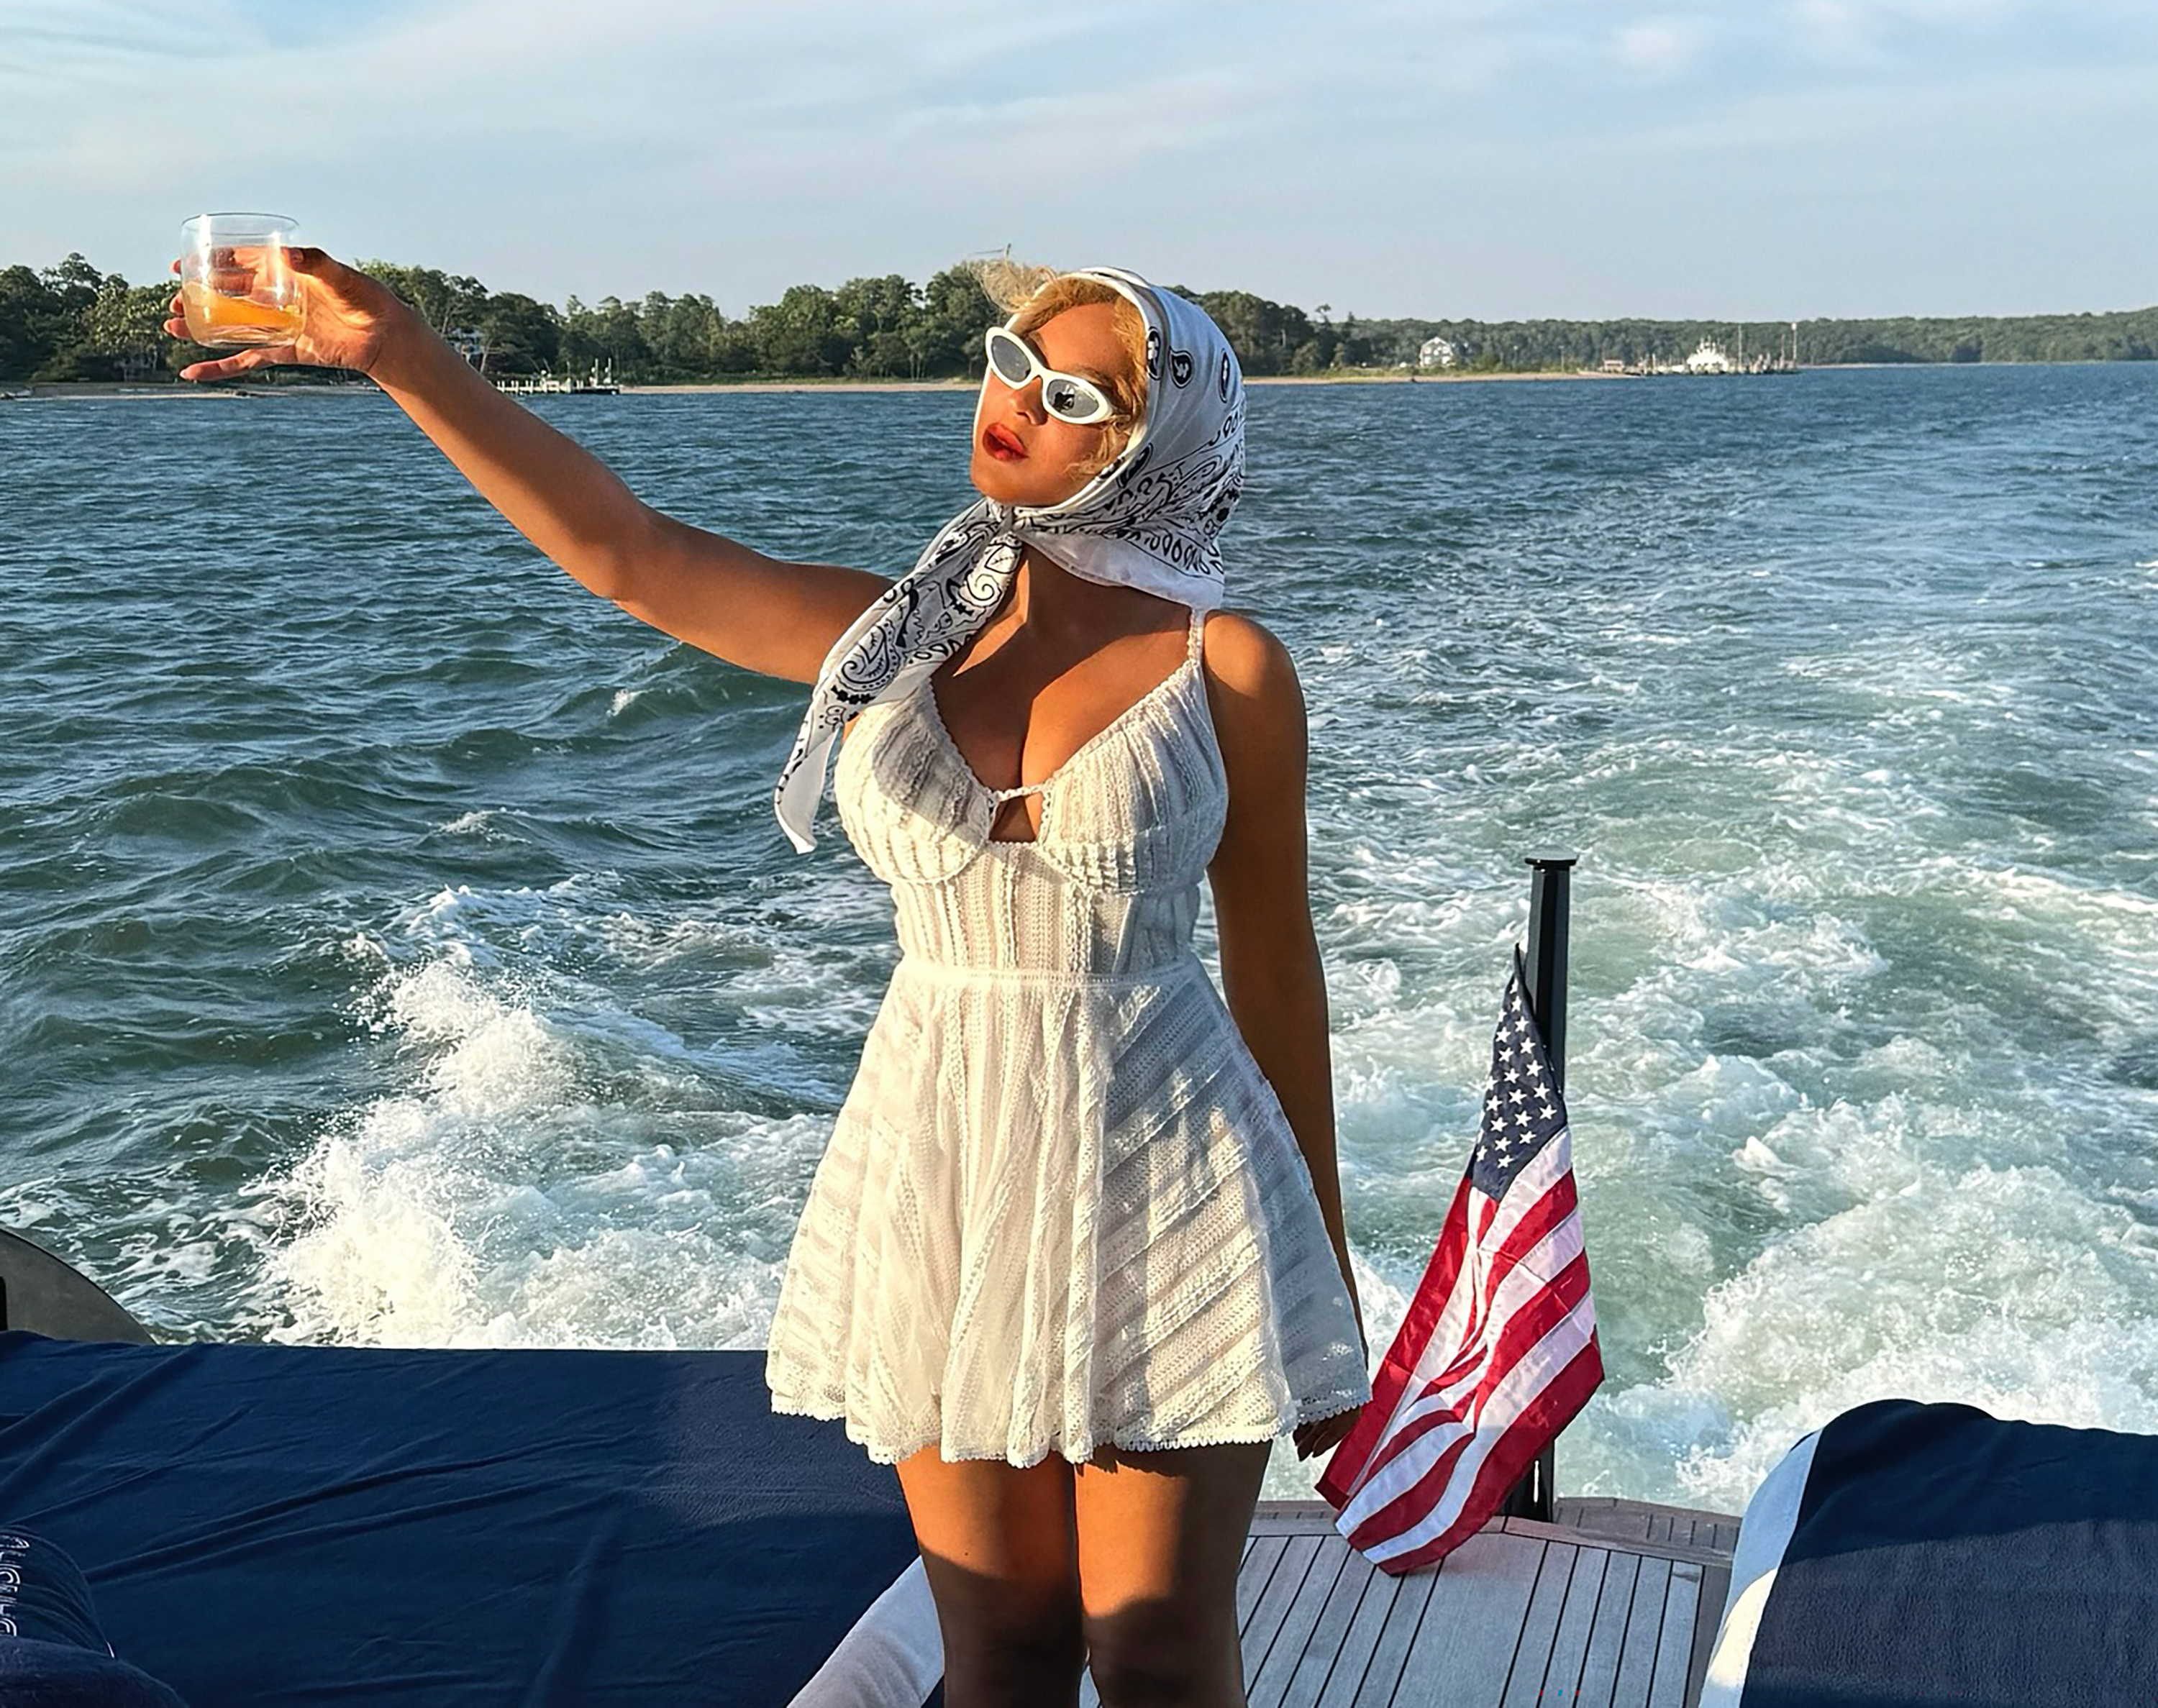 Beyonce held a drink in her hand while visiting US seaside resort the Hamptons